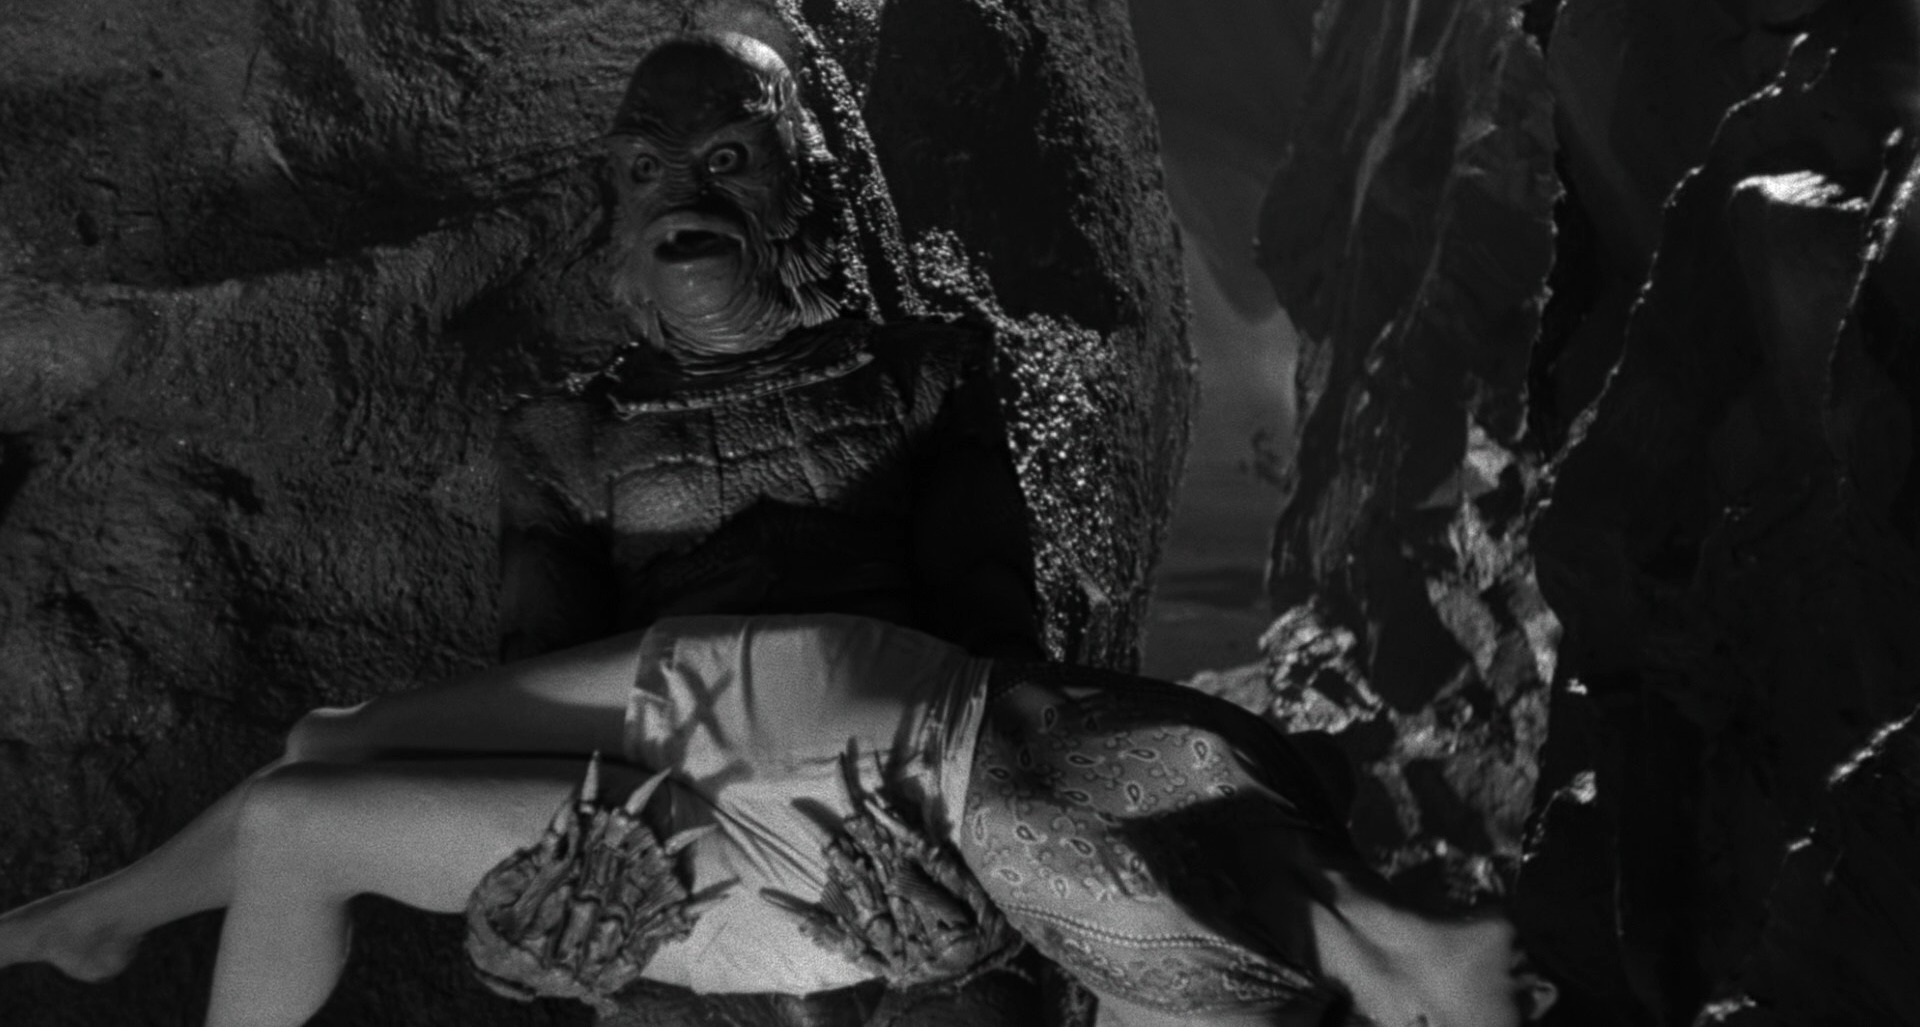 CREATURE FROM THE BLACK LAGOON (1954)